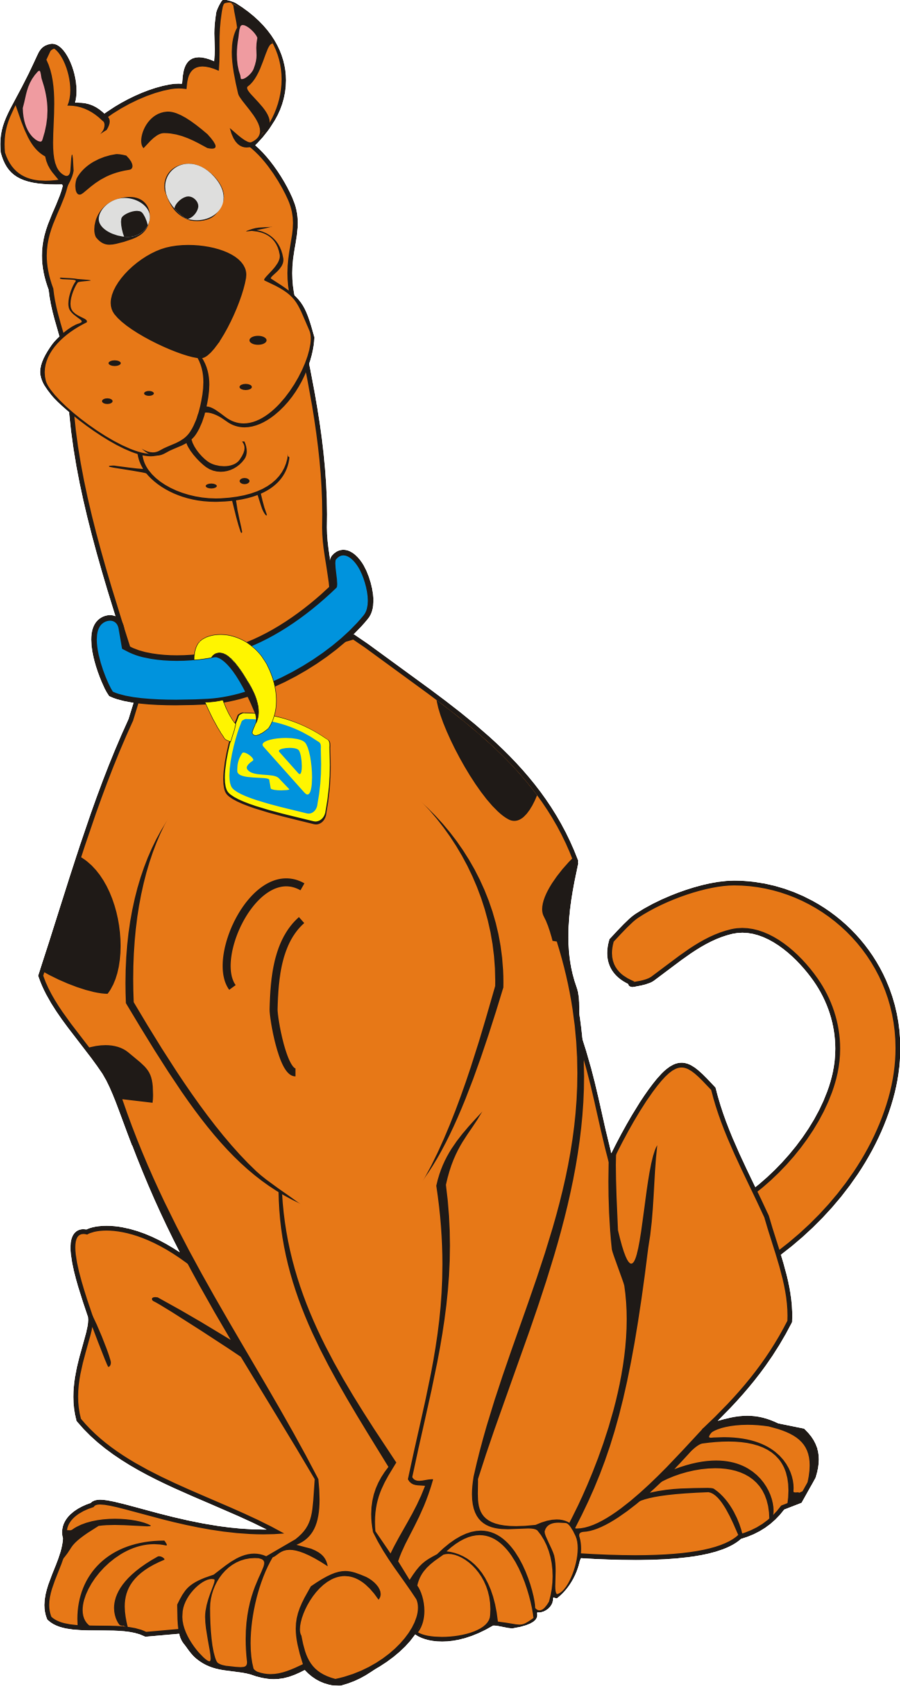 For u. Scooby doo clipart human